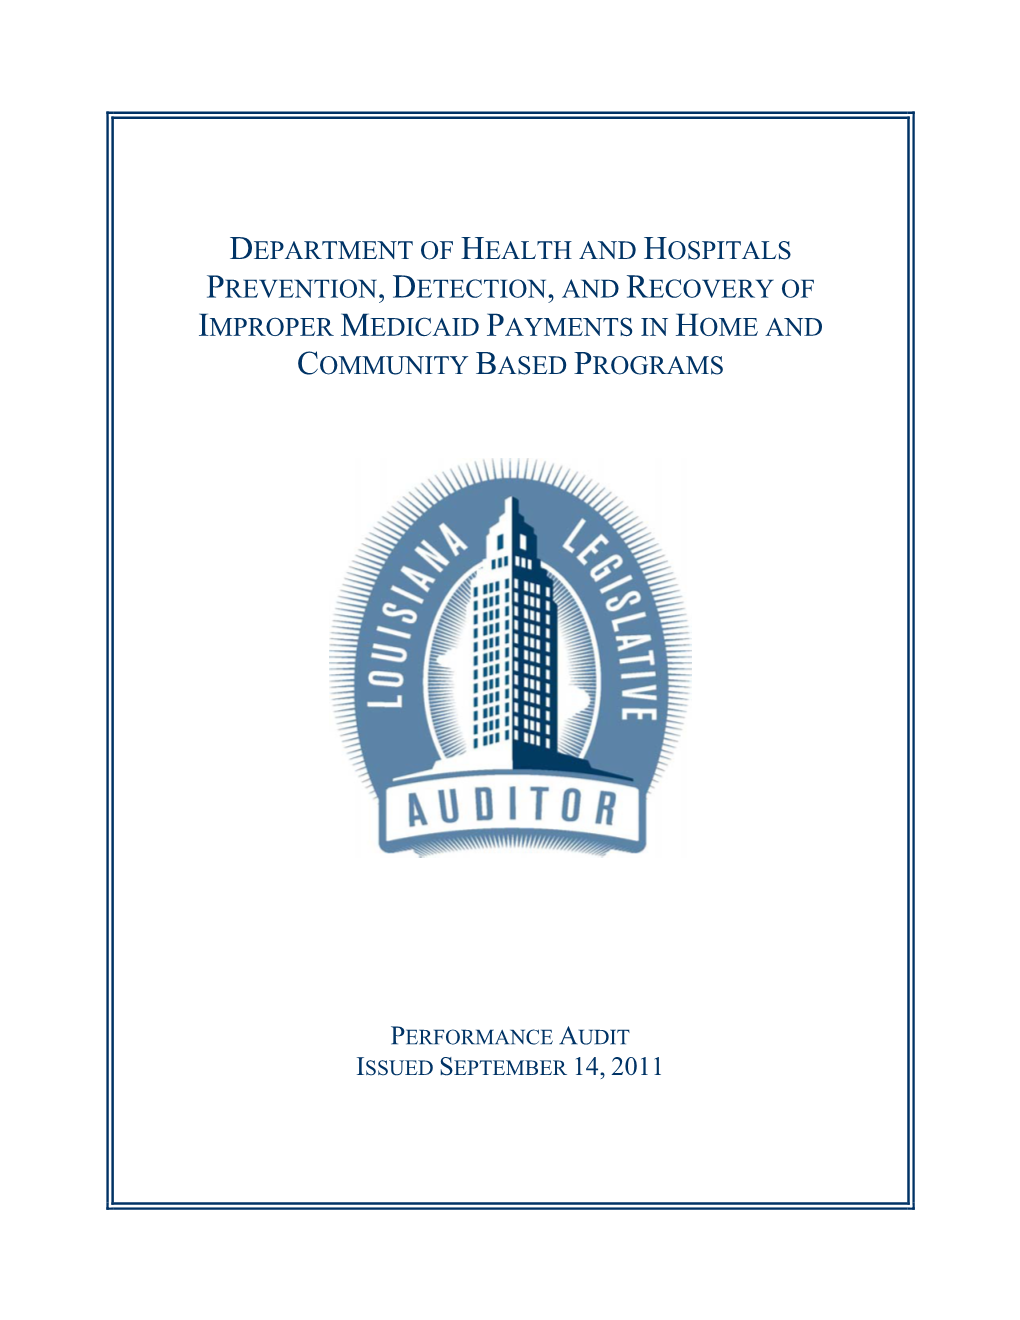 Department of Health and Hospitals Prevention, Detection, and Recovery of Improper Medicaid Payments in Home and Community Based Programs